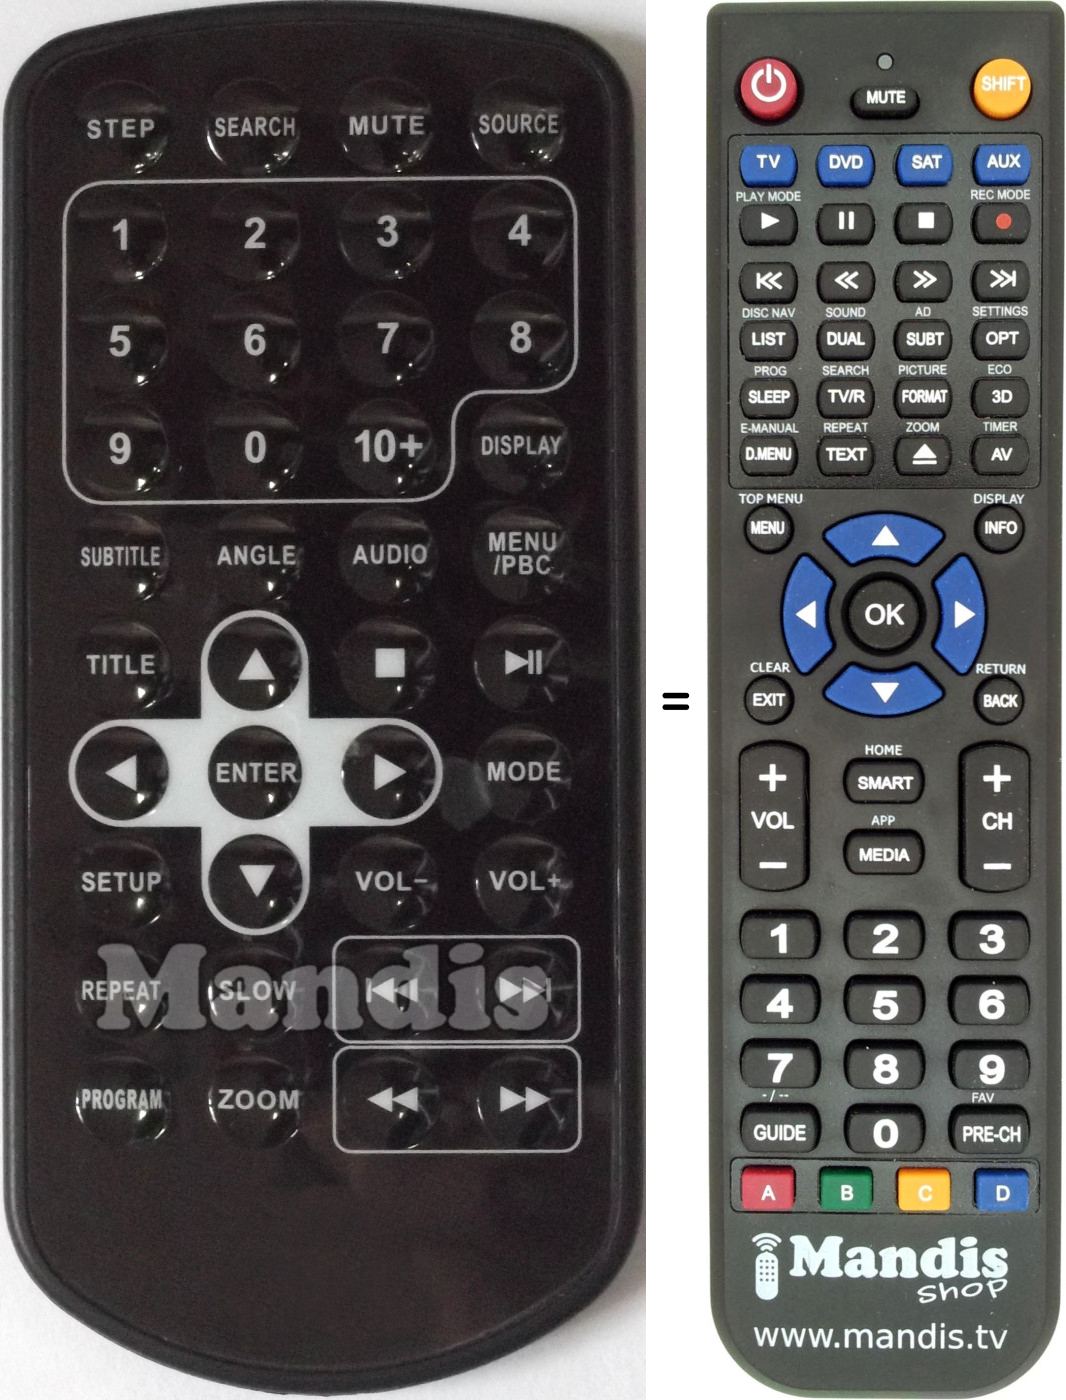 Replacement remote control D-JIX Easy Player DVD Dual